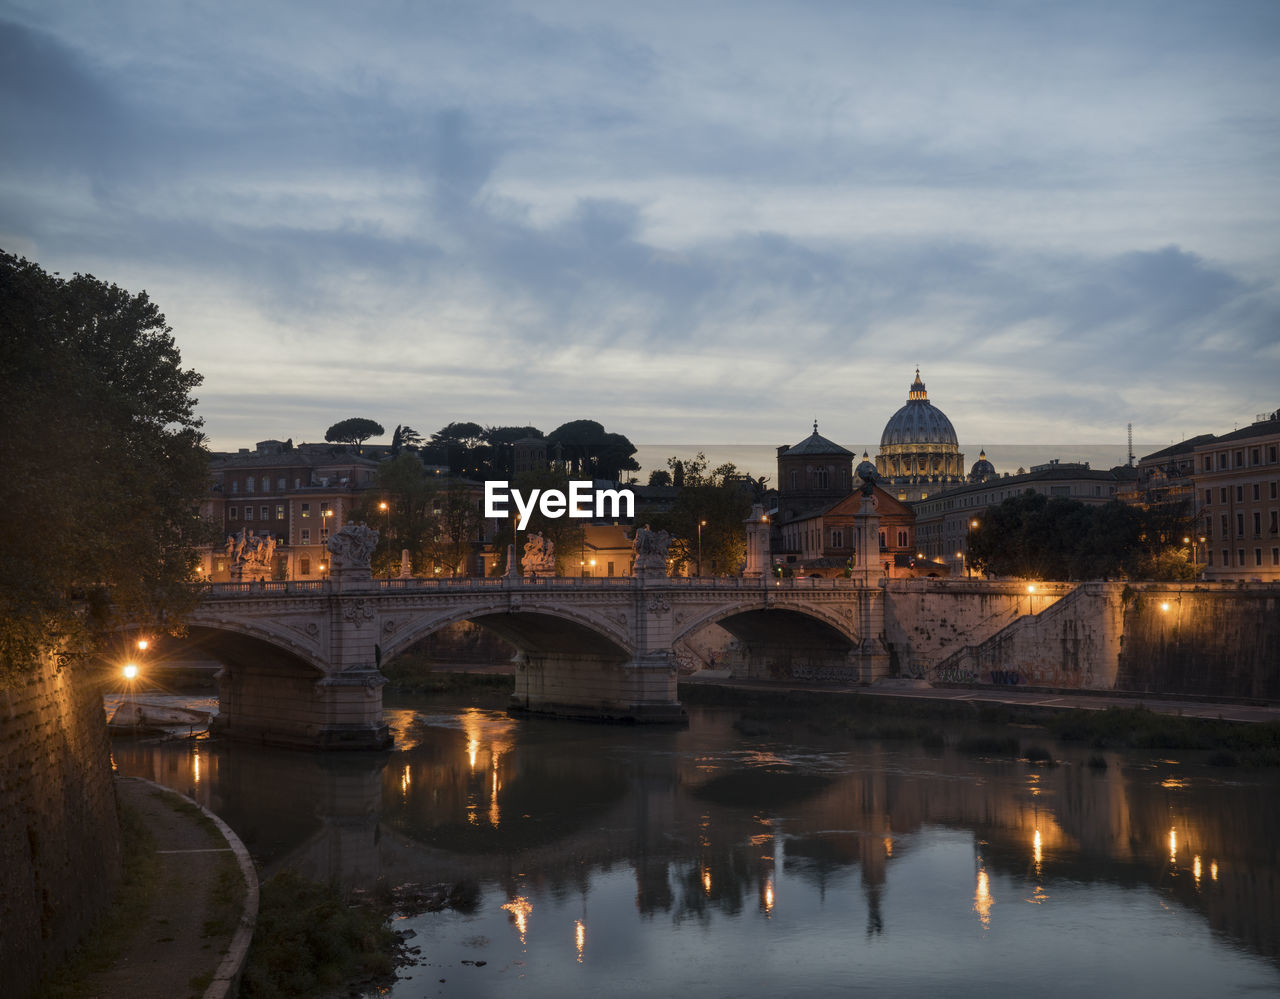 Evening view of st. peter's basilica from ponte st. angelo.